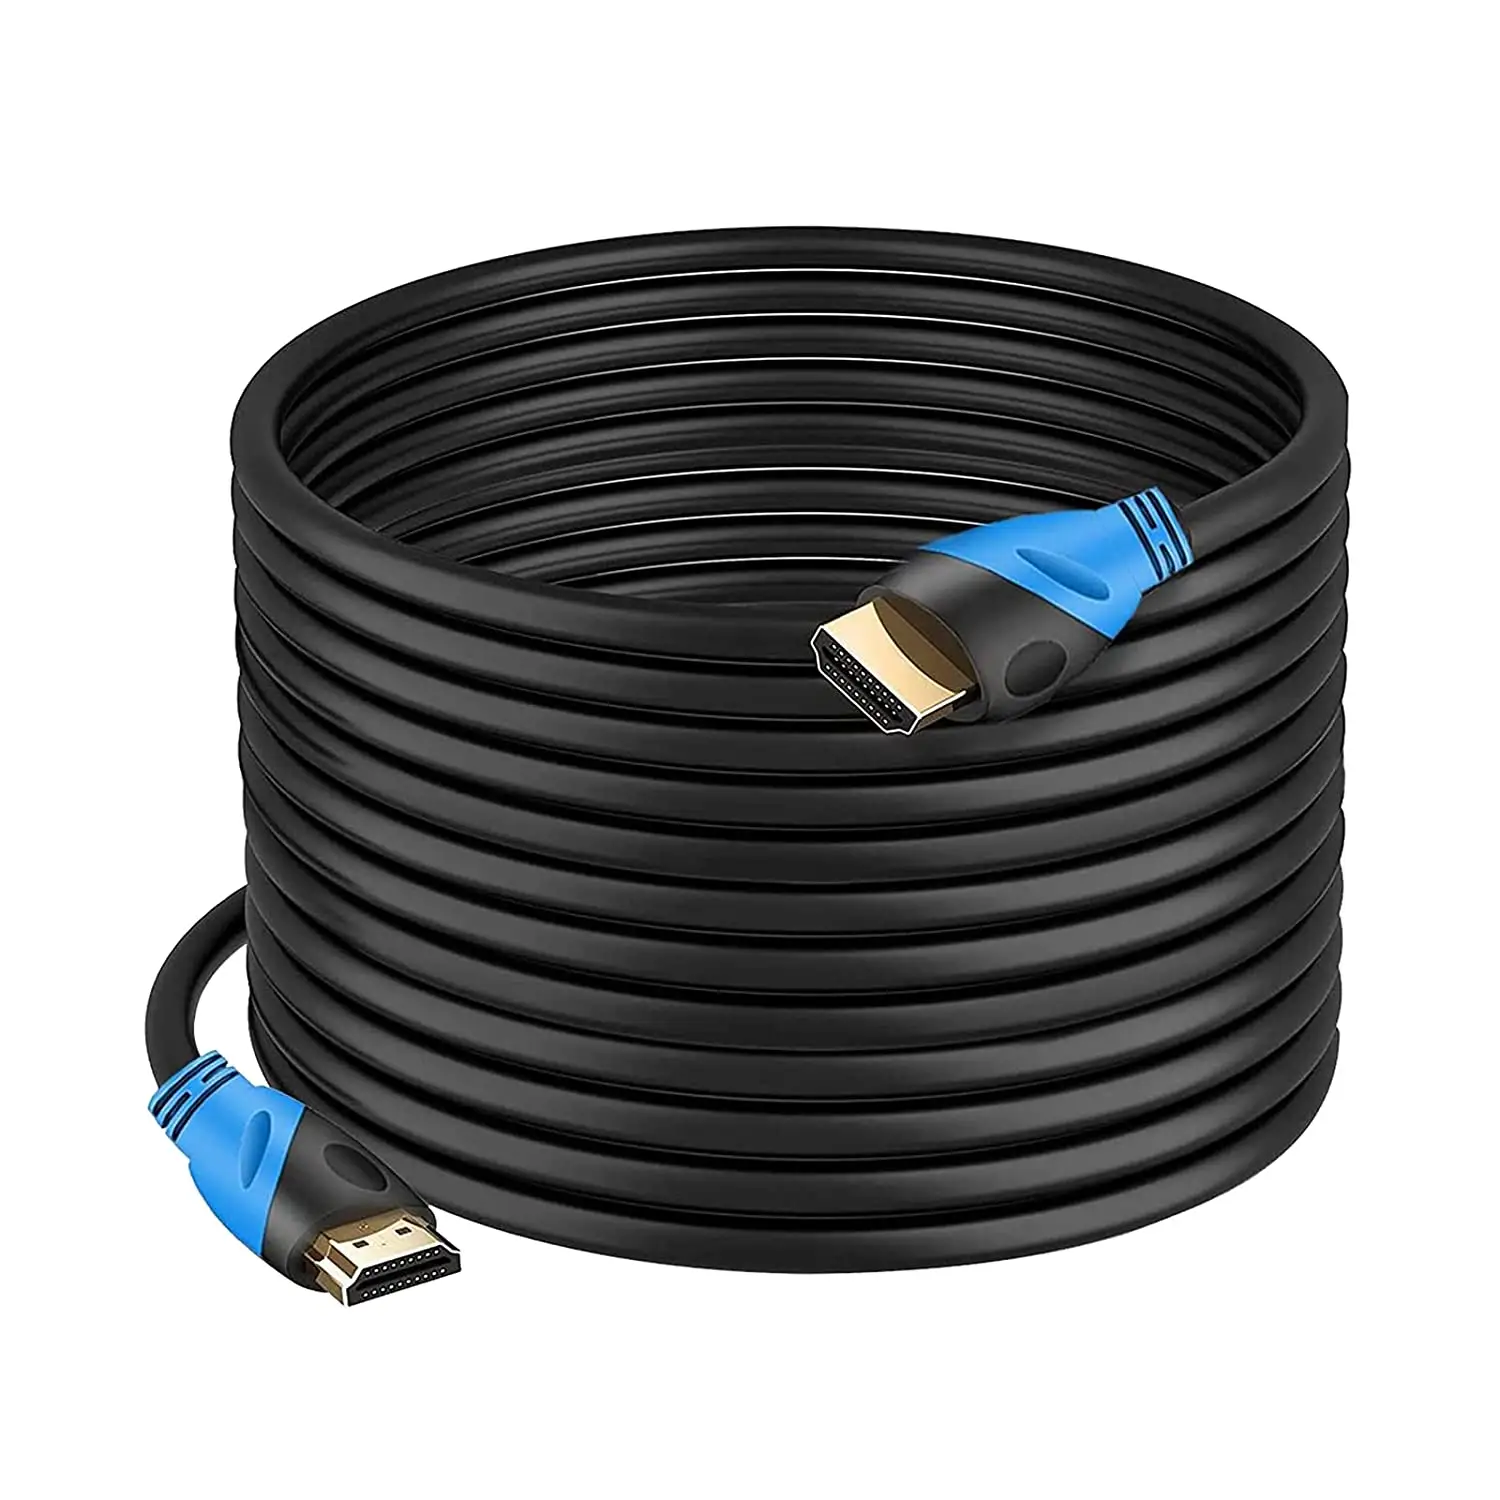 Active High quality long hdmi cable 10m 20m 30m 40m 50m high speed hdmi cable 4k with Amplifier active 4k hdmi cable